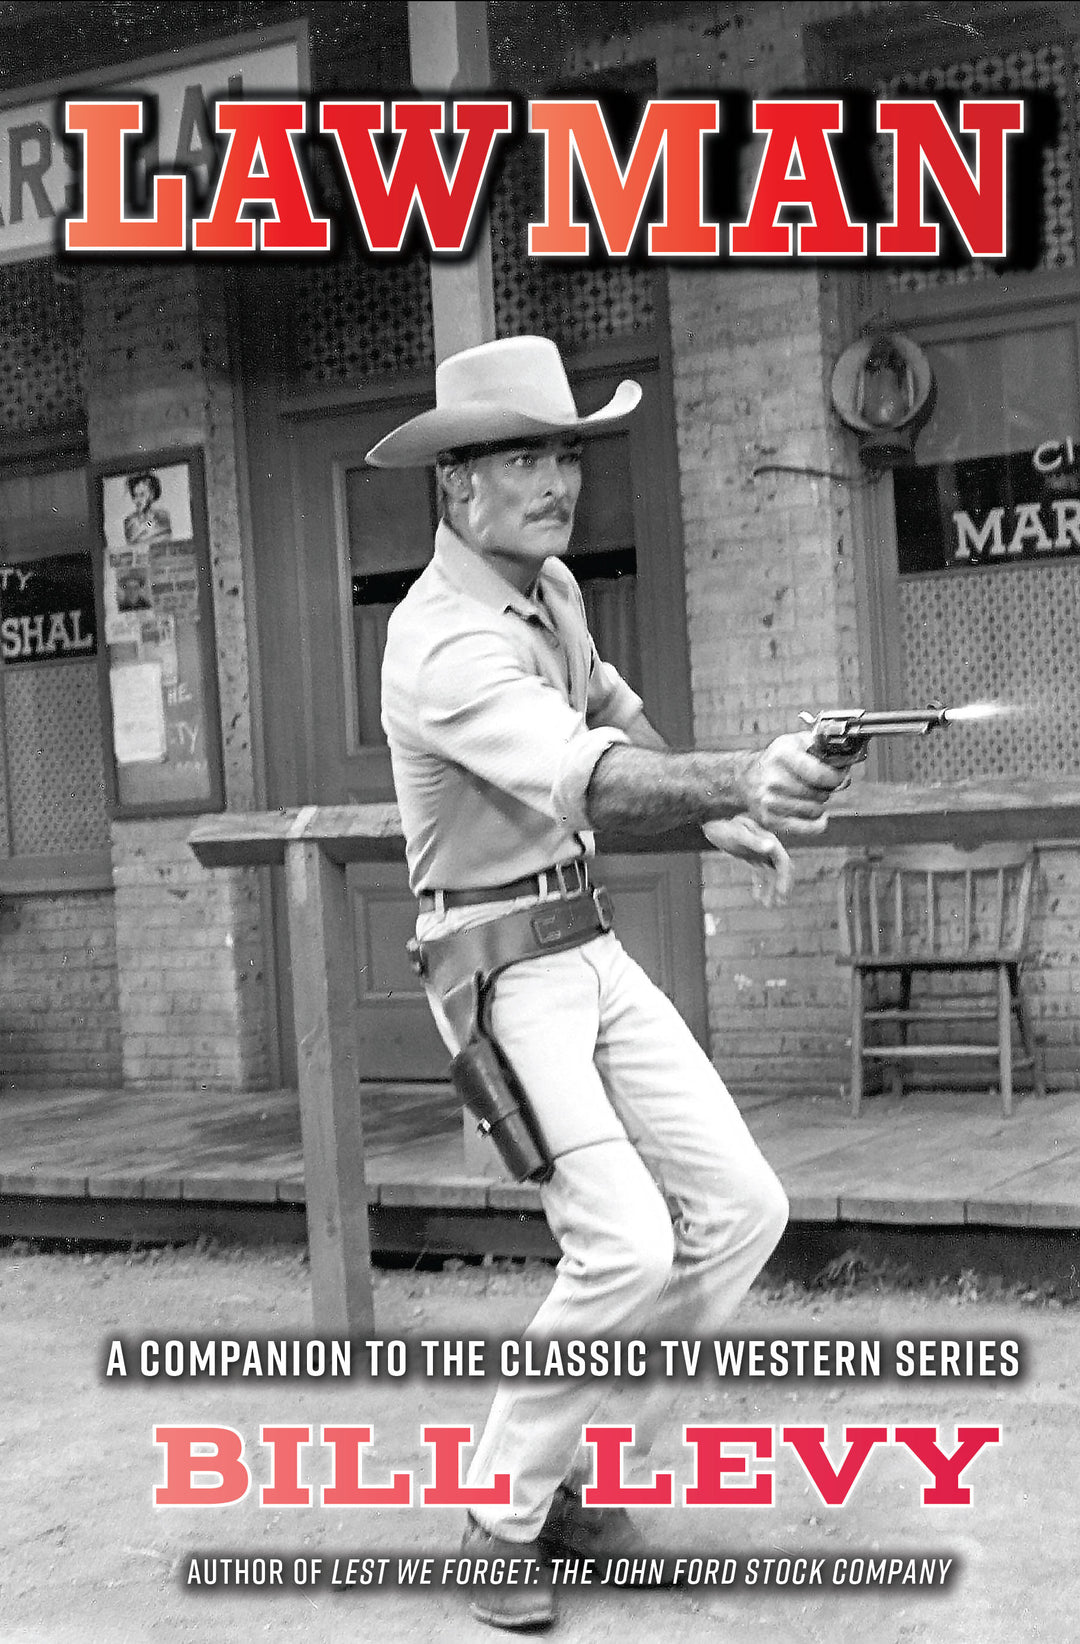 Lawman: A Companion to the Classic TV Western Series (paperback)